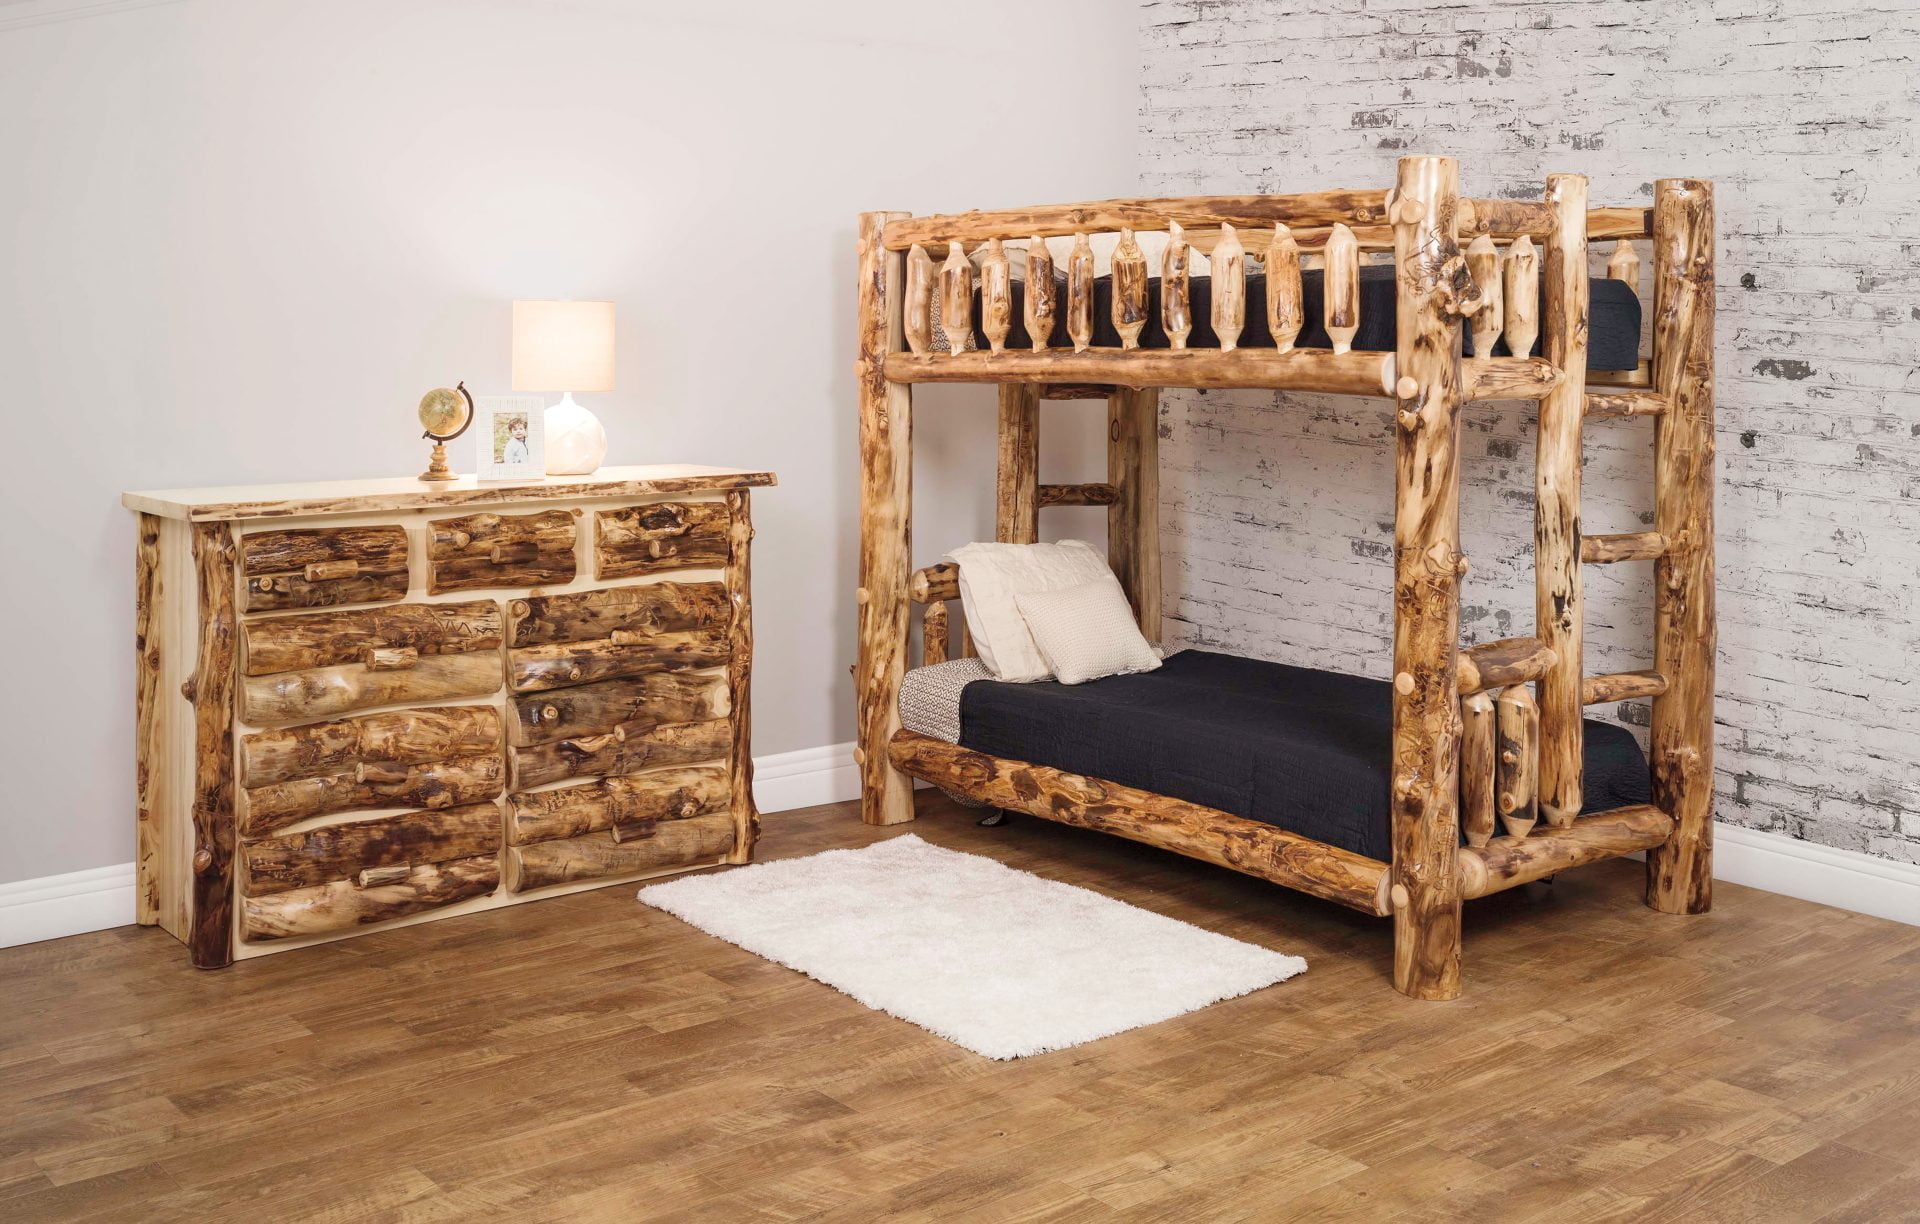 Rustic Aspen Log Bunk Bed Bedroom Set – 1 Twin over Twin Bunk Bed and 1 9-Drawer Dresser